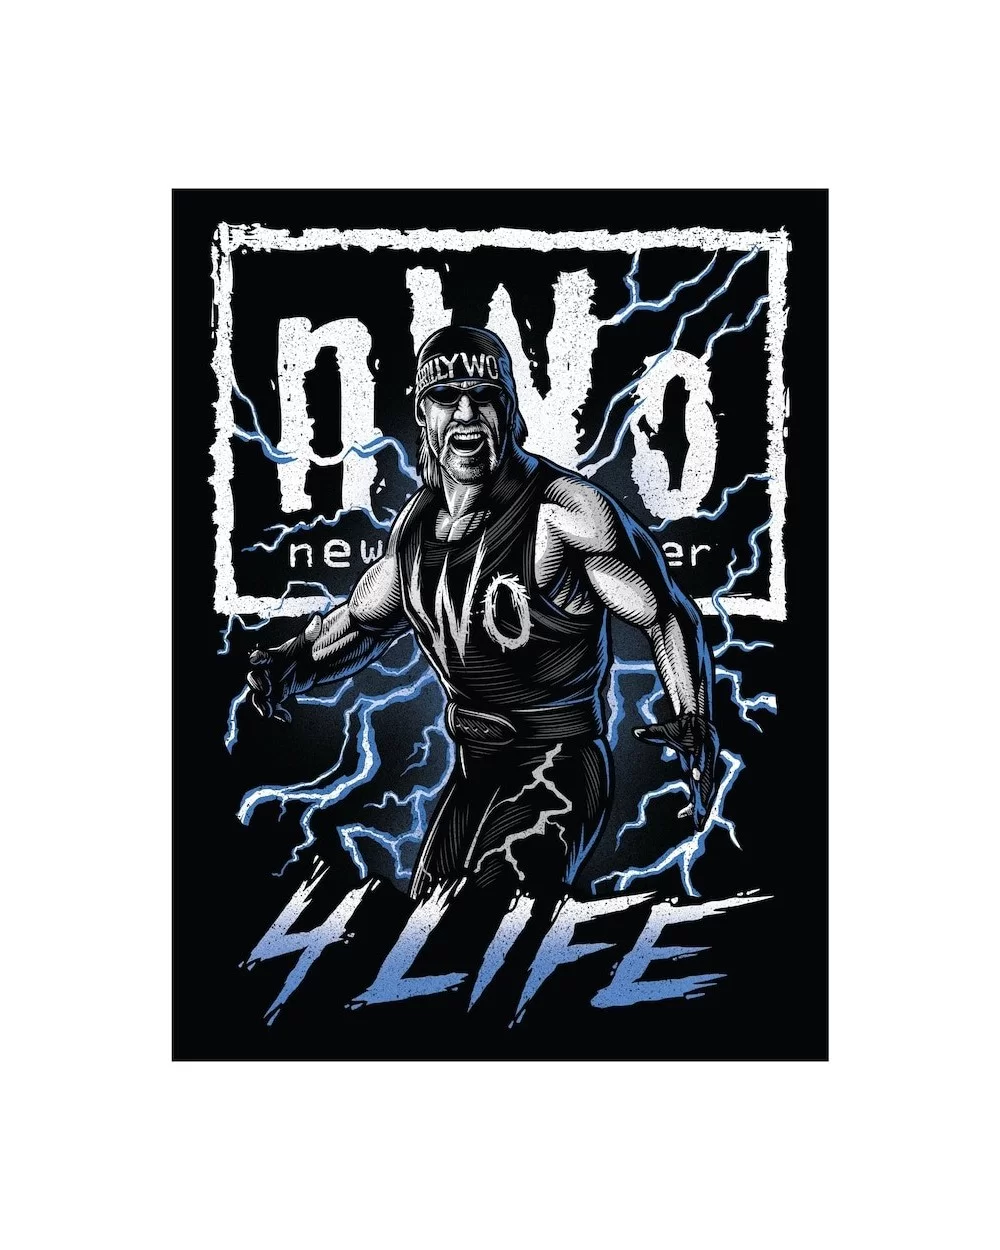 Fathead nWo 4 Life Removable Superstar Mural Decal $15.84 Home & Office